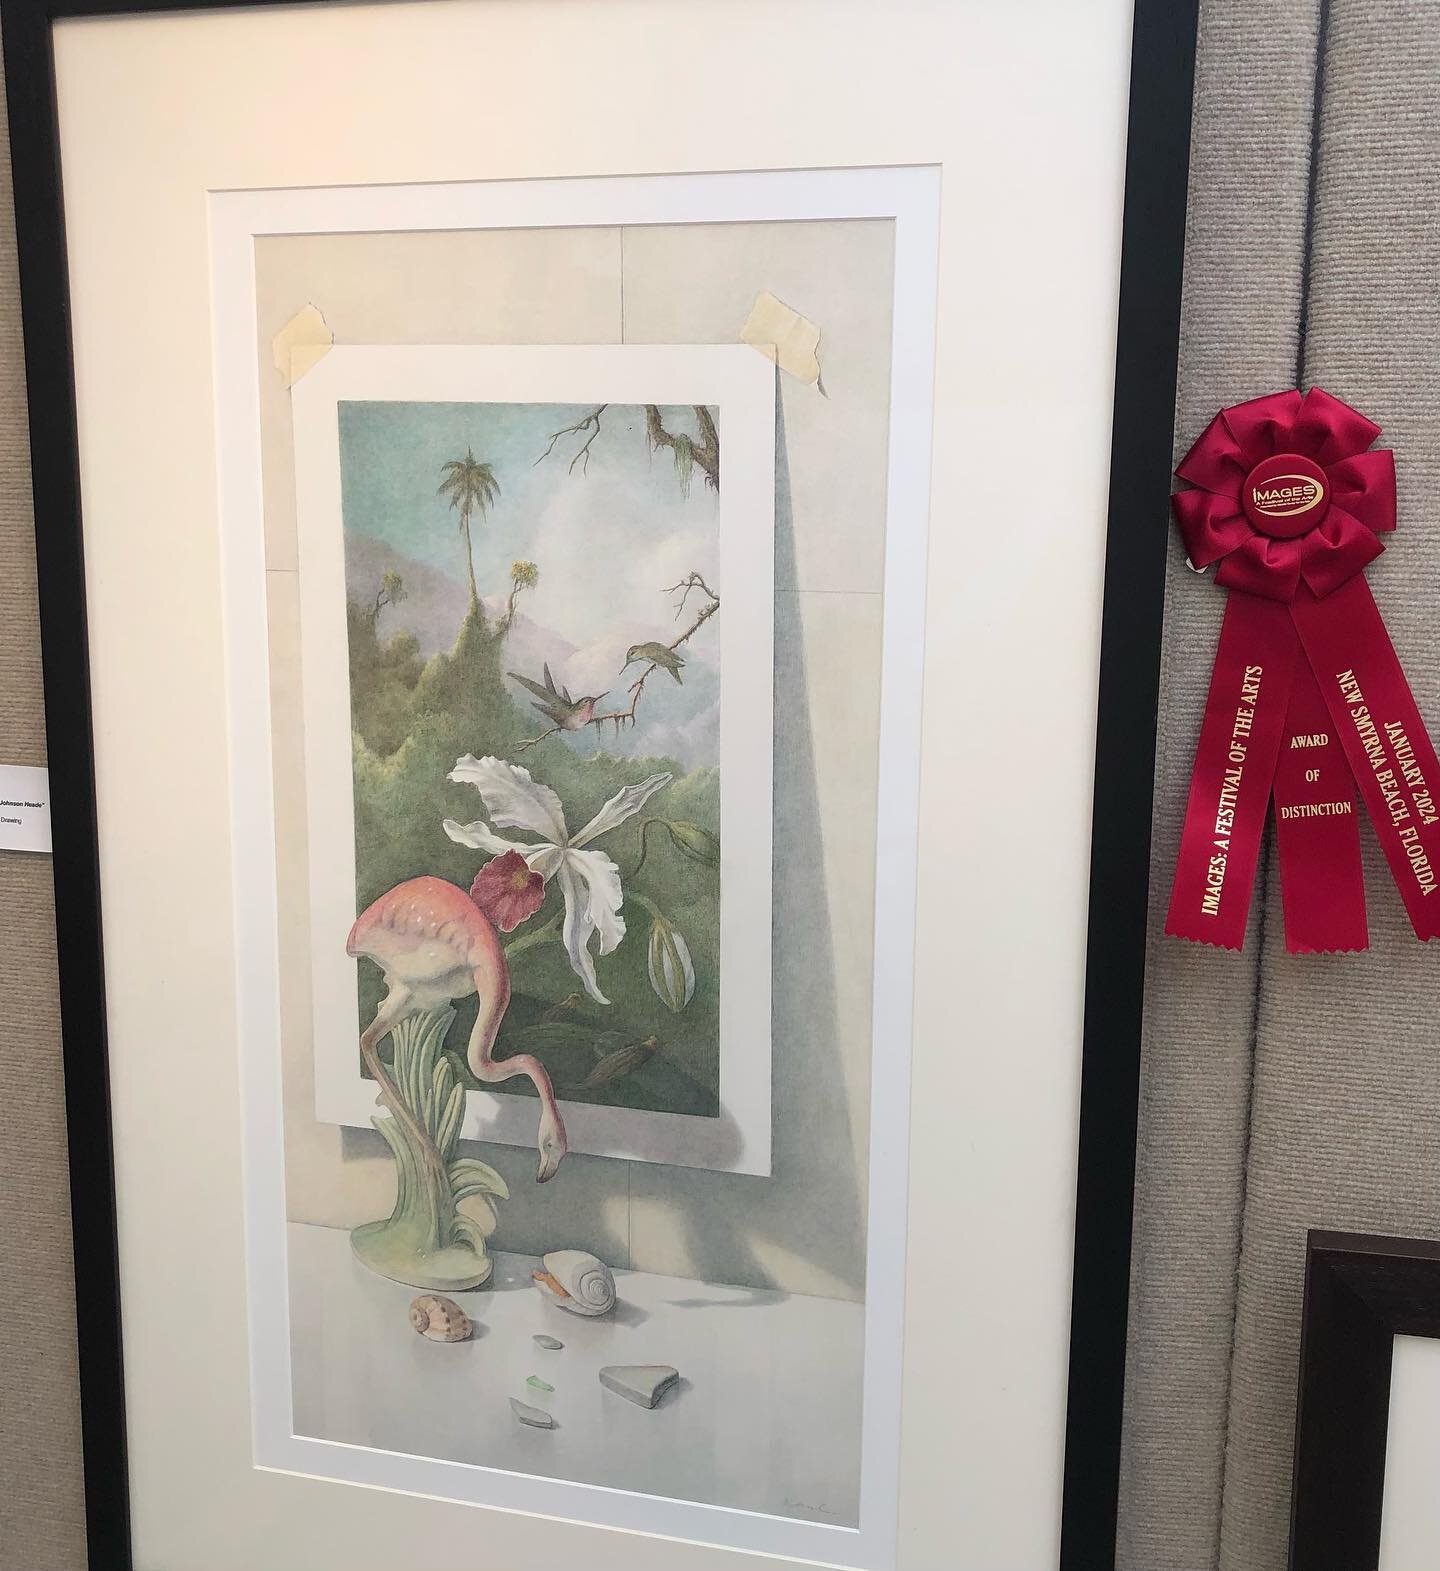 Thank you to this year&rsquo;s judges at IMAGES Art Festival in New Smyrna Beach!! Festival continue today, 10-4. Booth 24
#dennisangeldrawings #imagesartfestival colored pencil drawing